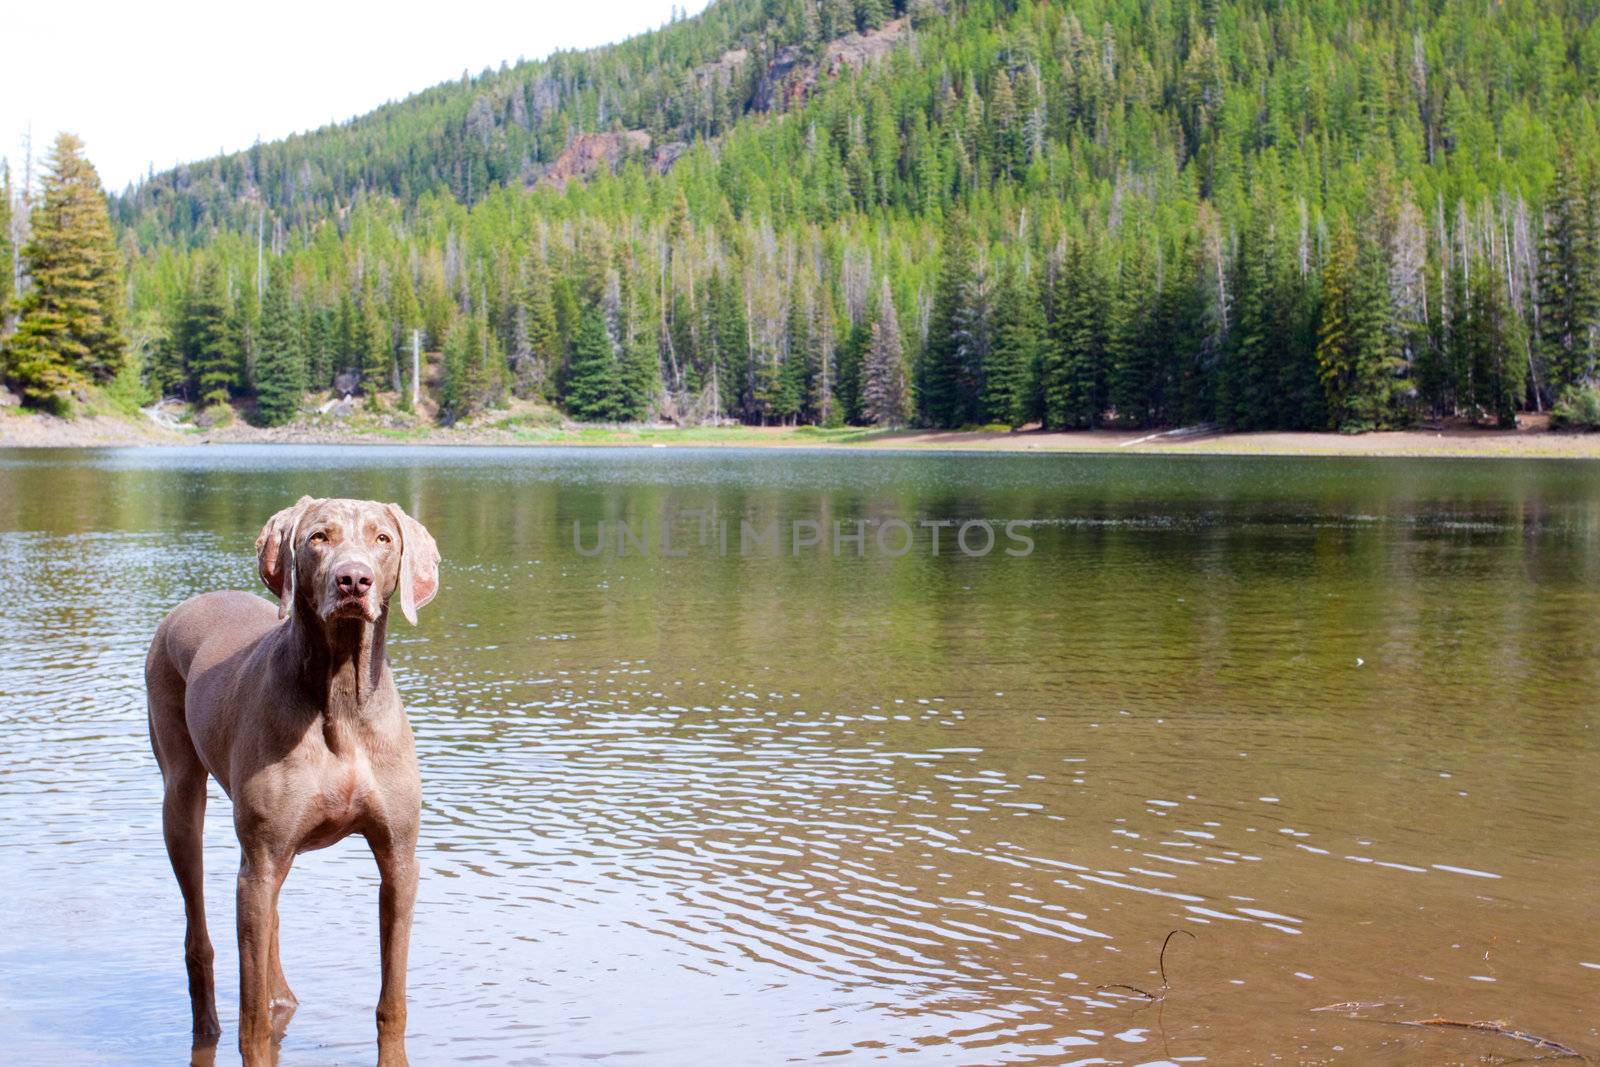 A weimaraner enjoys the water in Eastern Oregon along a river and lake.